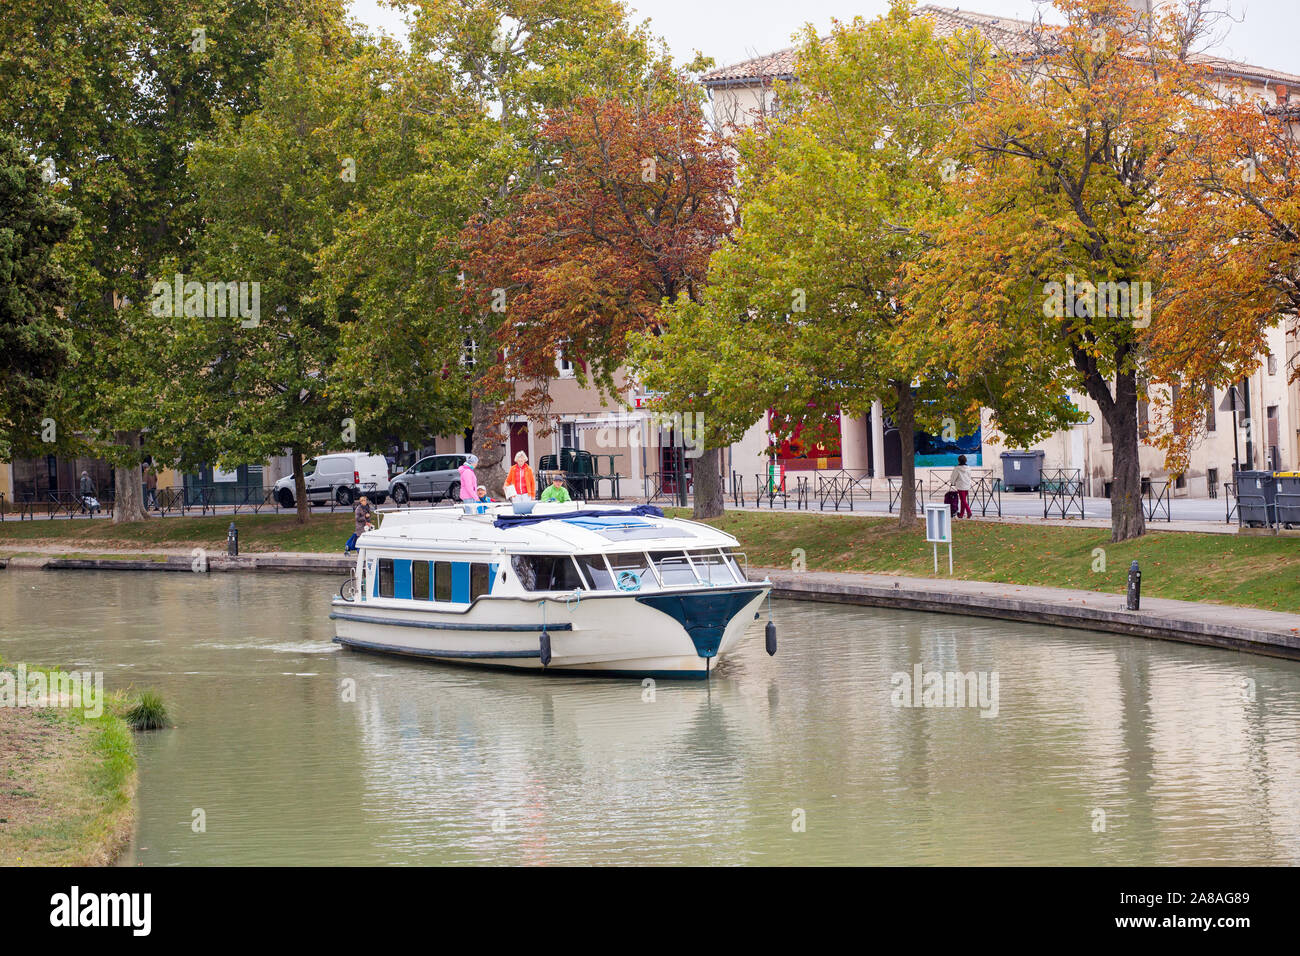 Family people driving a pleasure boat on the Canal du Midi in the French town of Carcassonne France during Autumn Stock Photo